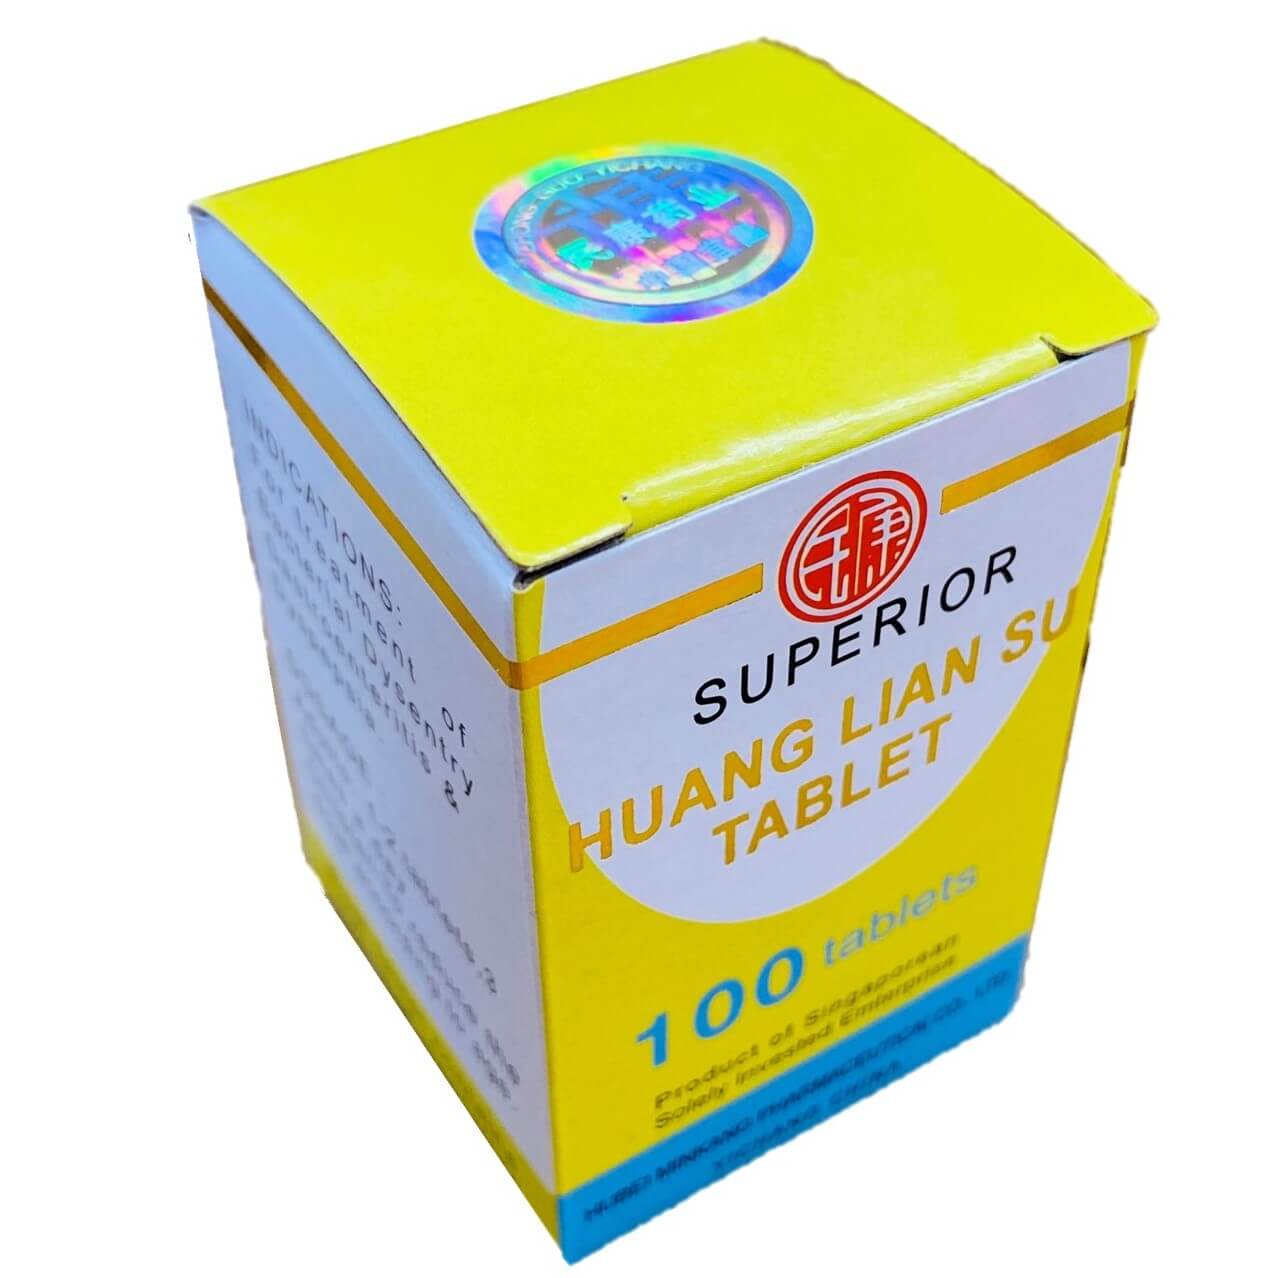 Superior Huang Lian Su Tablets Coptis Extract (100 Tablets) - Buy at New Green Nutrition